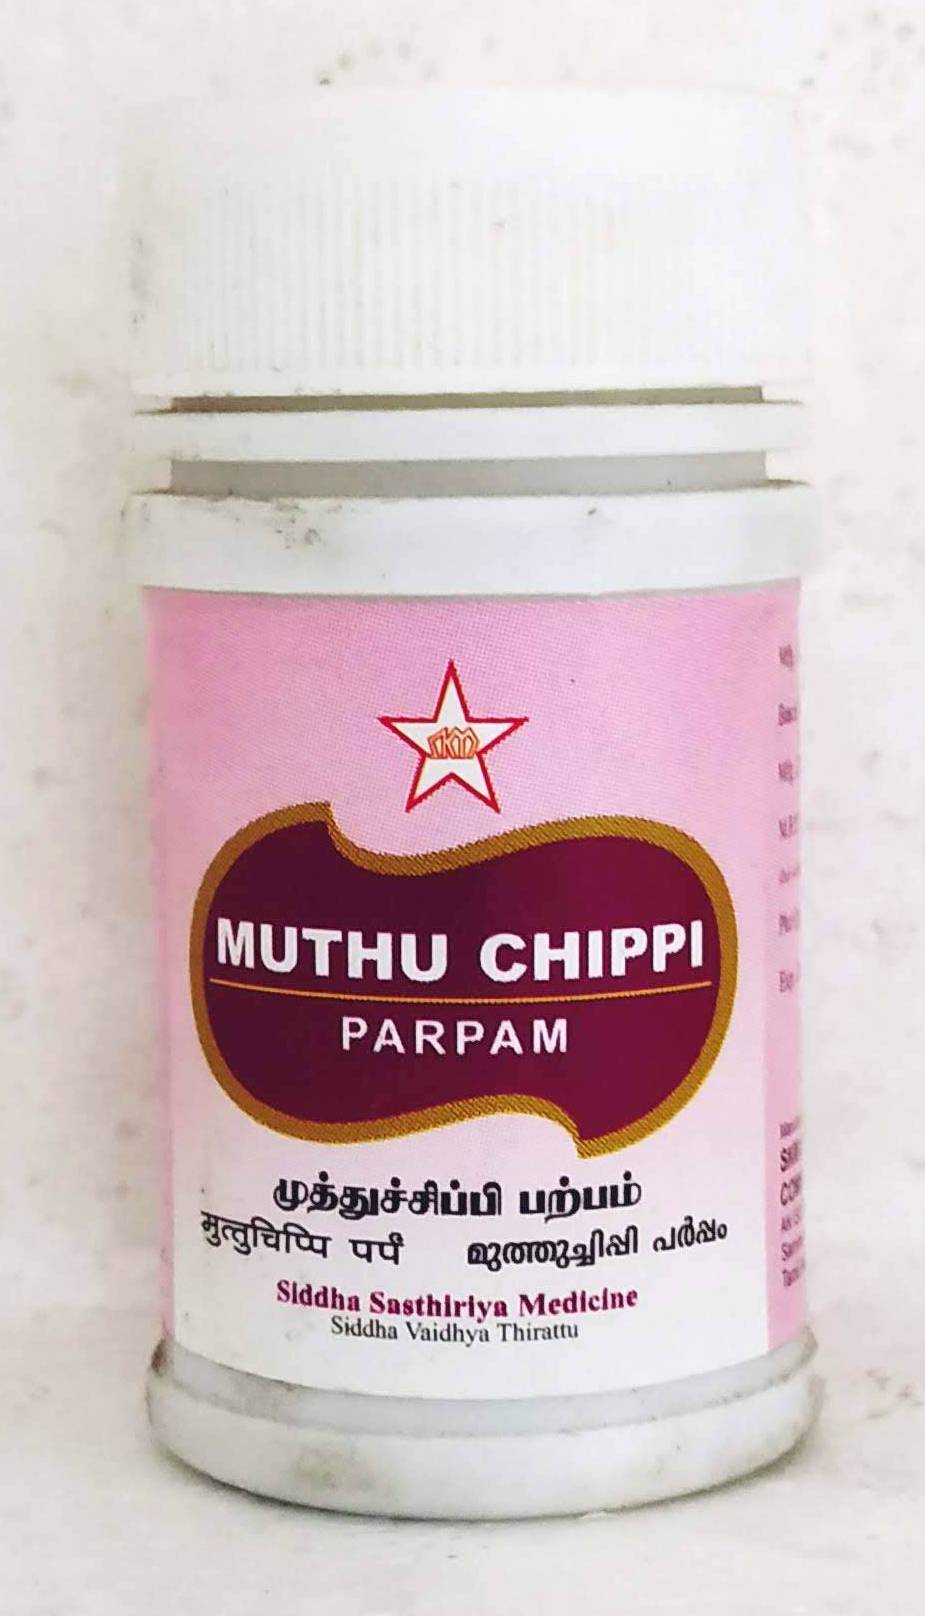 Shop Muthuchippi Parpam 10gm at price 35.00 from SKM Online - Ayush Care